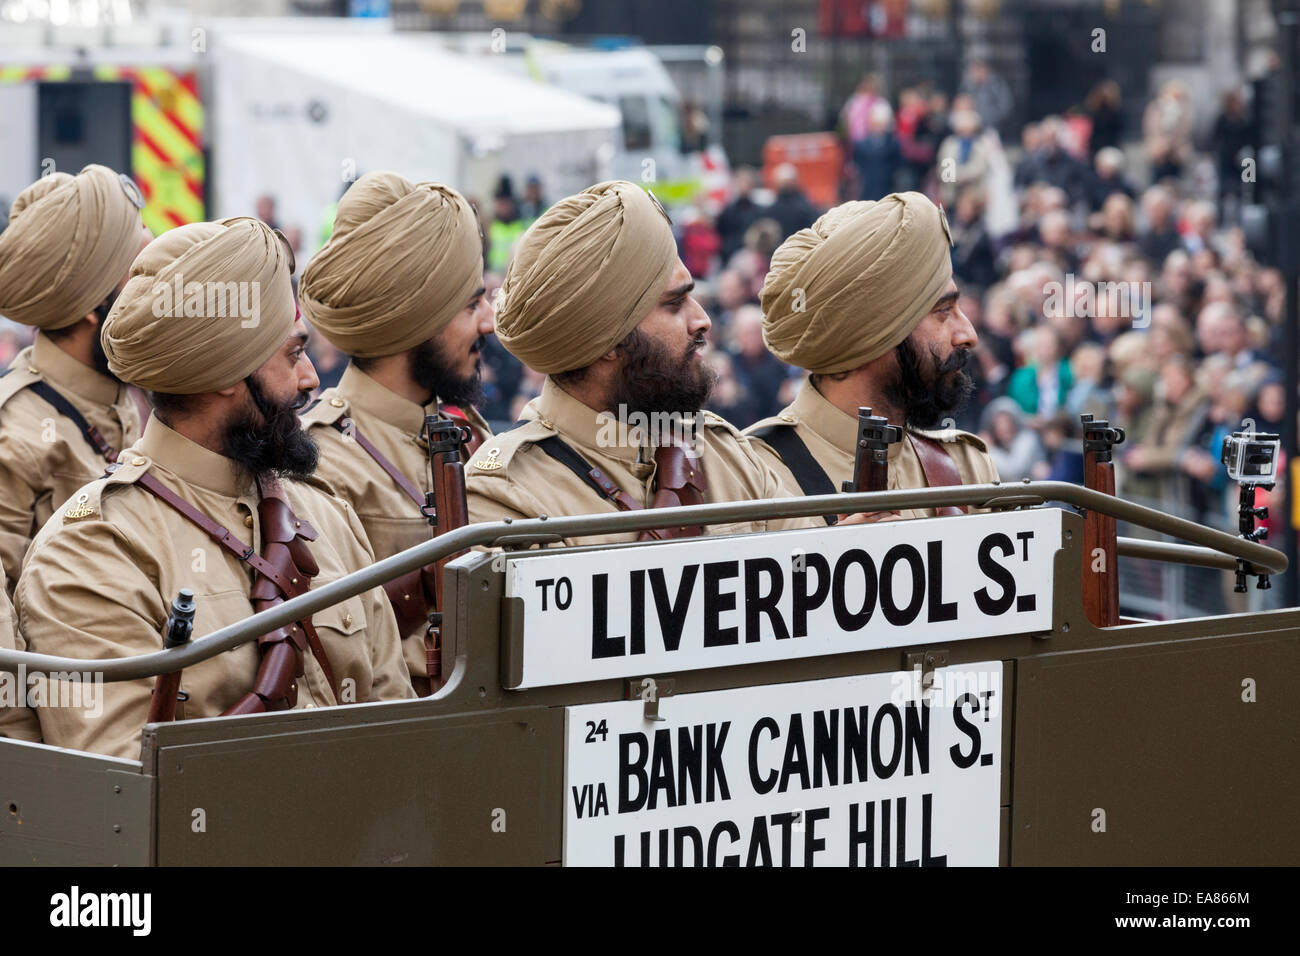 8th November 2014, Lord Mayor's Show, City of London, London, UK.  Members of the 15th Sikh Ludhiana Regiment take part in the procession. The Lord Mayor's Show is the oldest civil procession in the world, it celebrates the start of a one-year term for the new Mayor of the City of London. Stock Photo